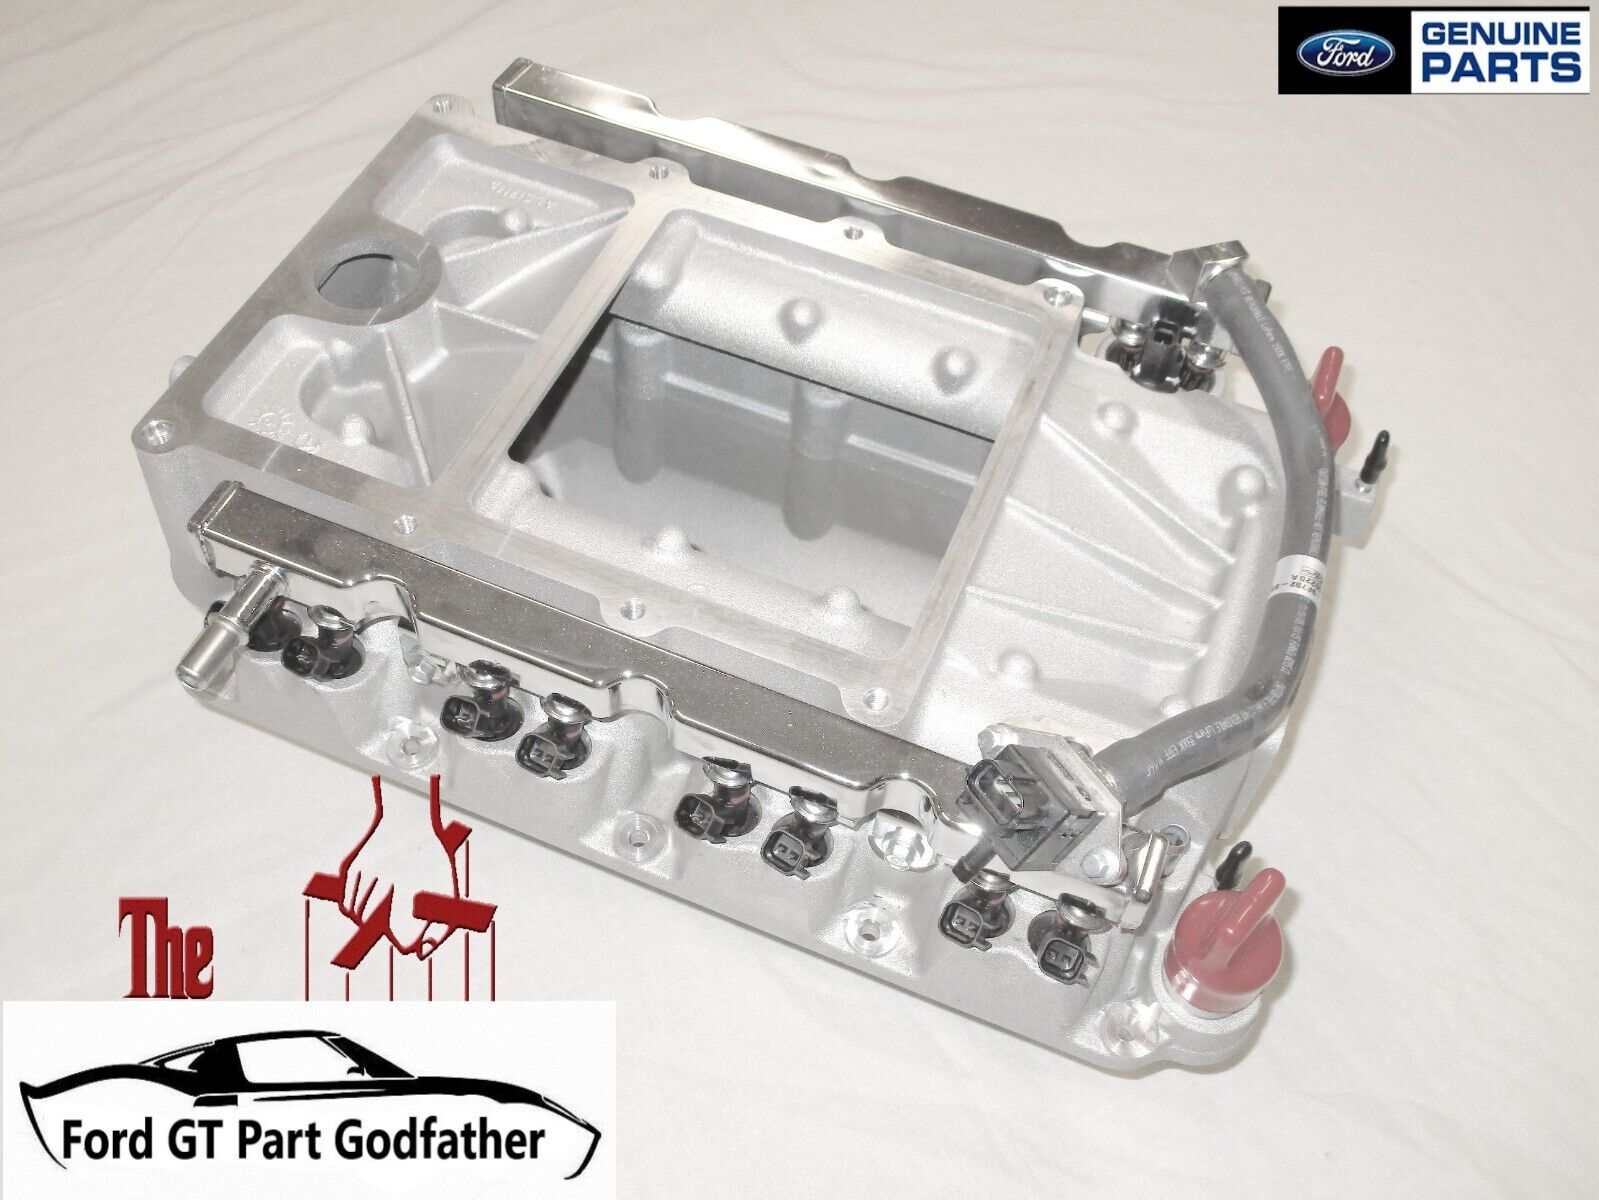 2005,2006 FORD GT GT40 SUPERCAR FACTORY OEM INTAKE MANIFOLD SYSTEM 05/06